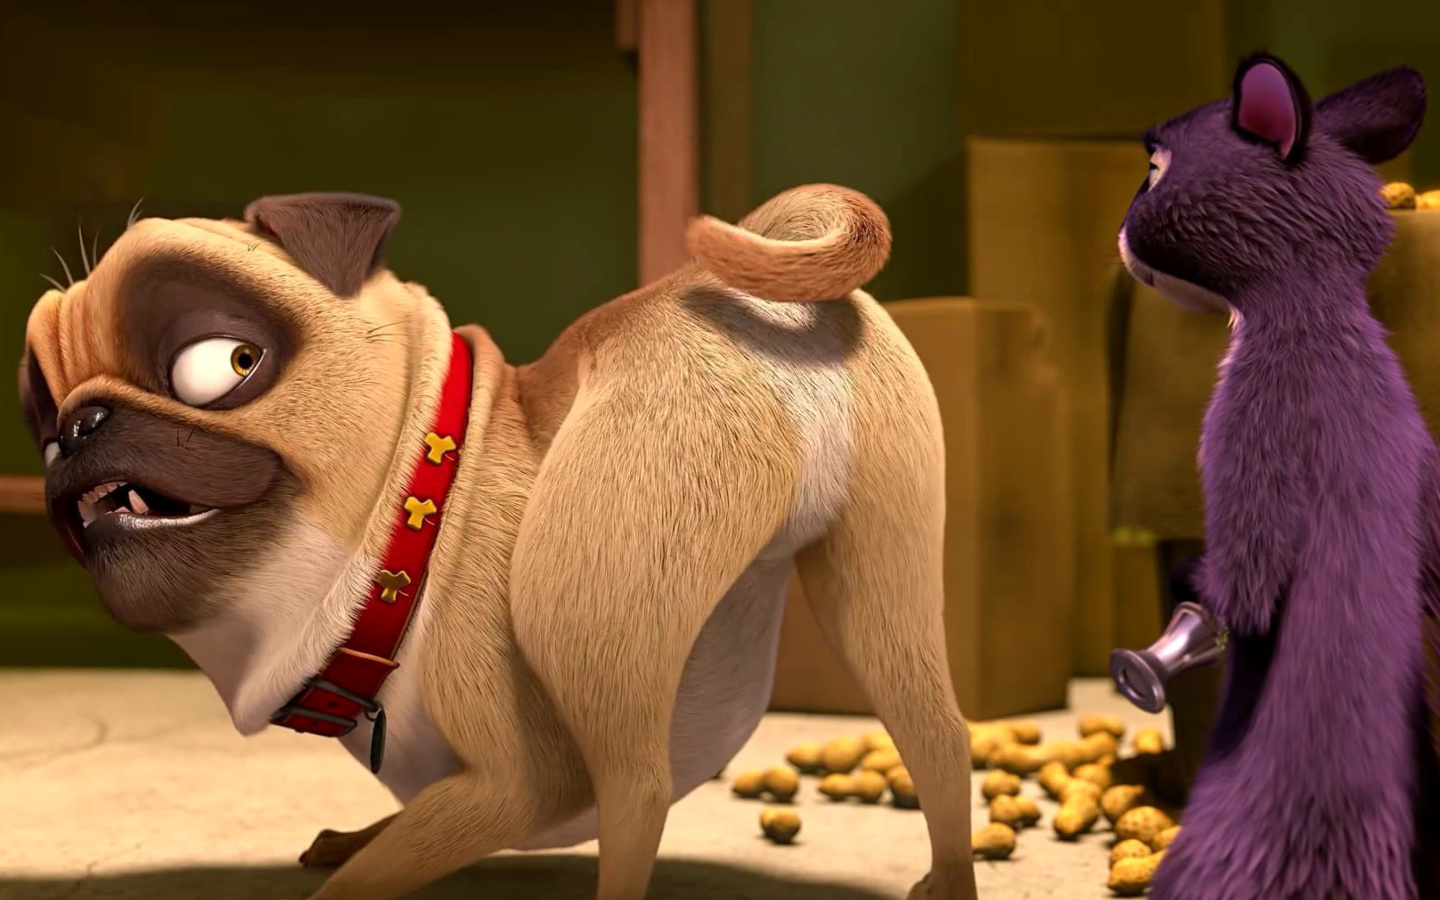 Precious and Surly in The Nut Job screenshot #1 1440x900